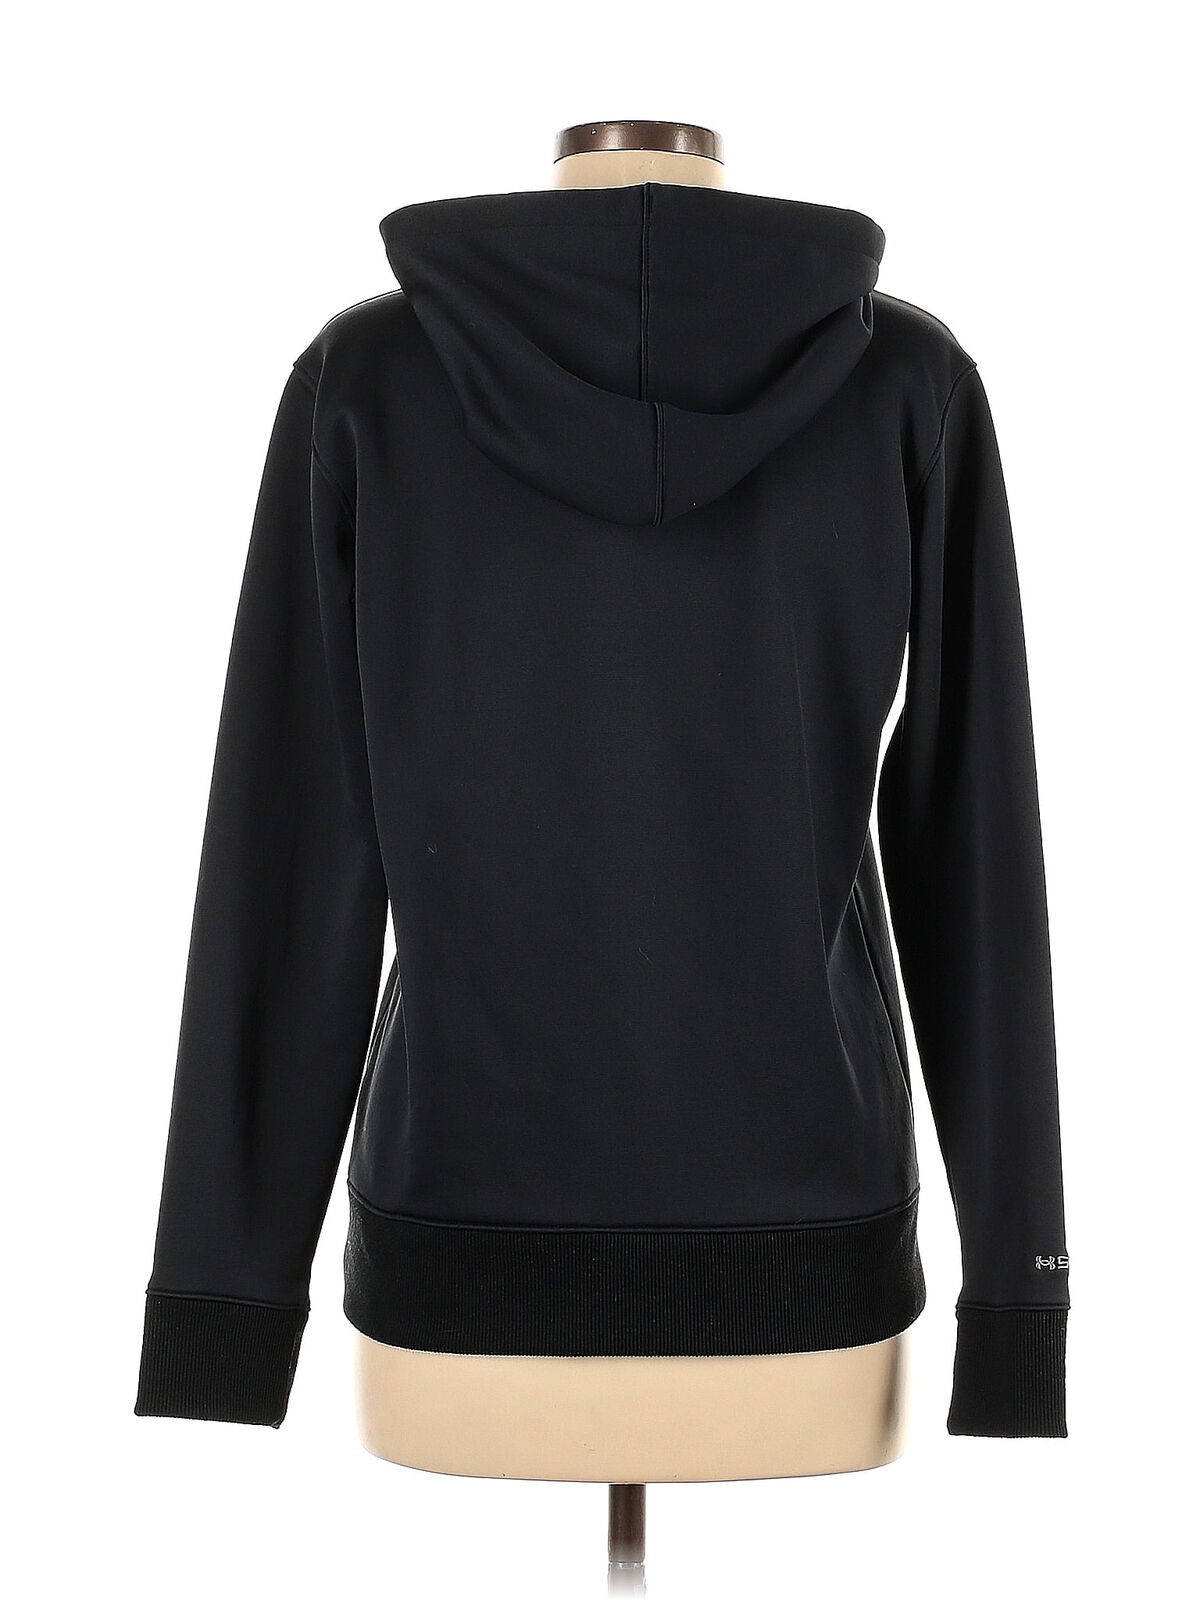 Under Armour Women Black Pullover Hoodie S - image 2